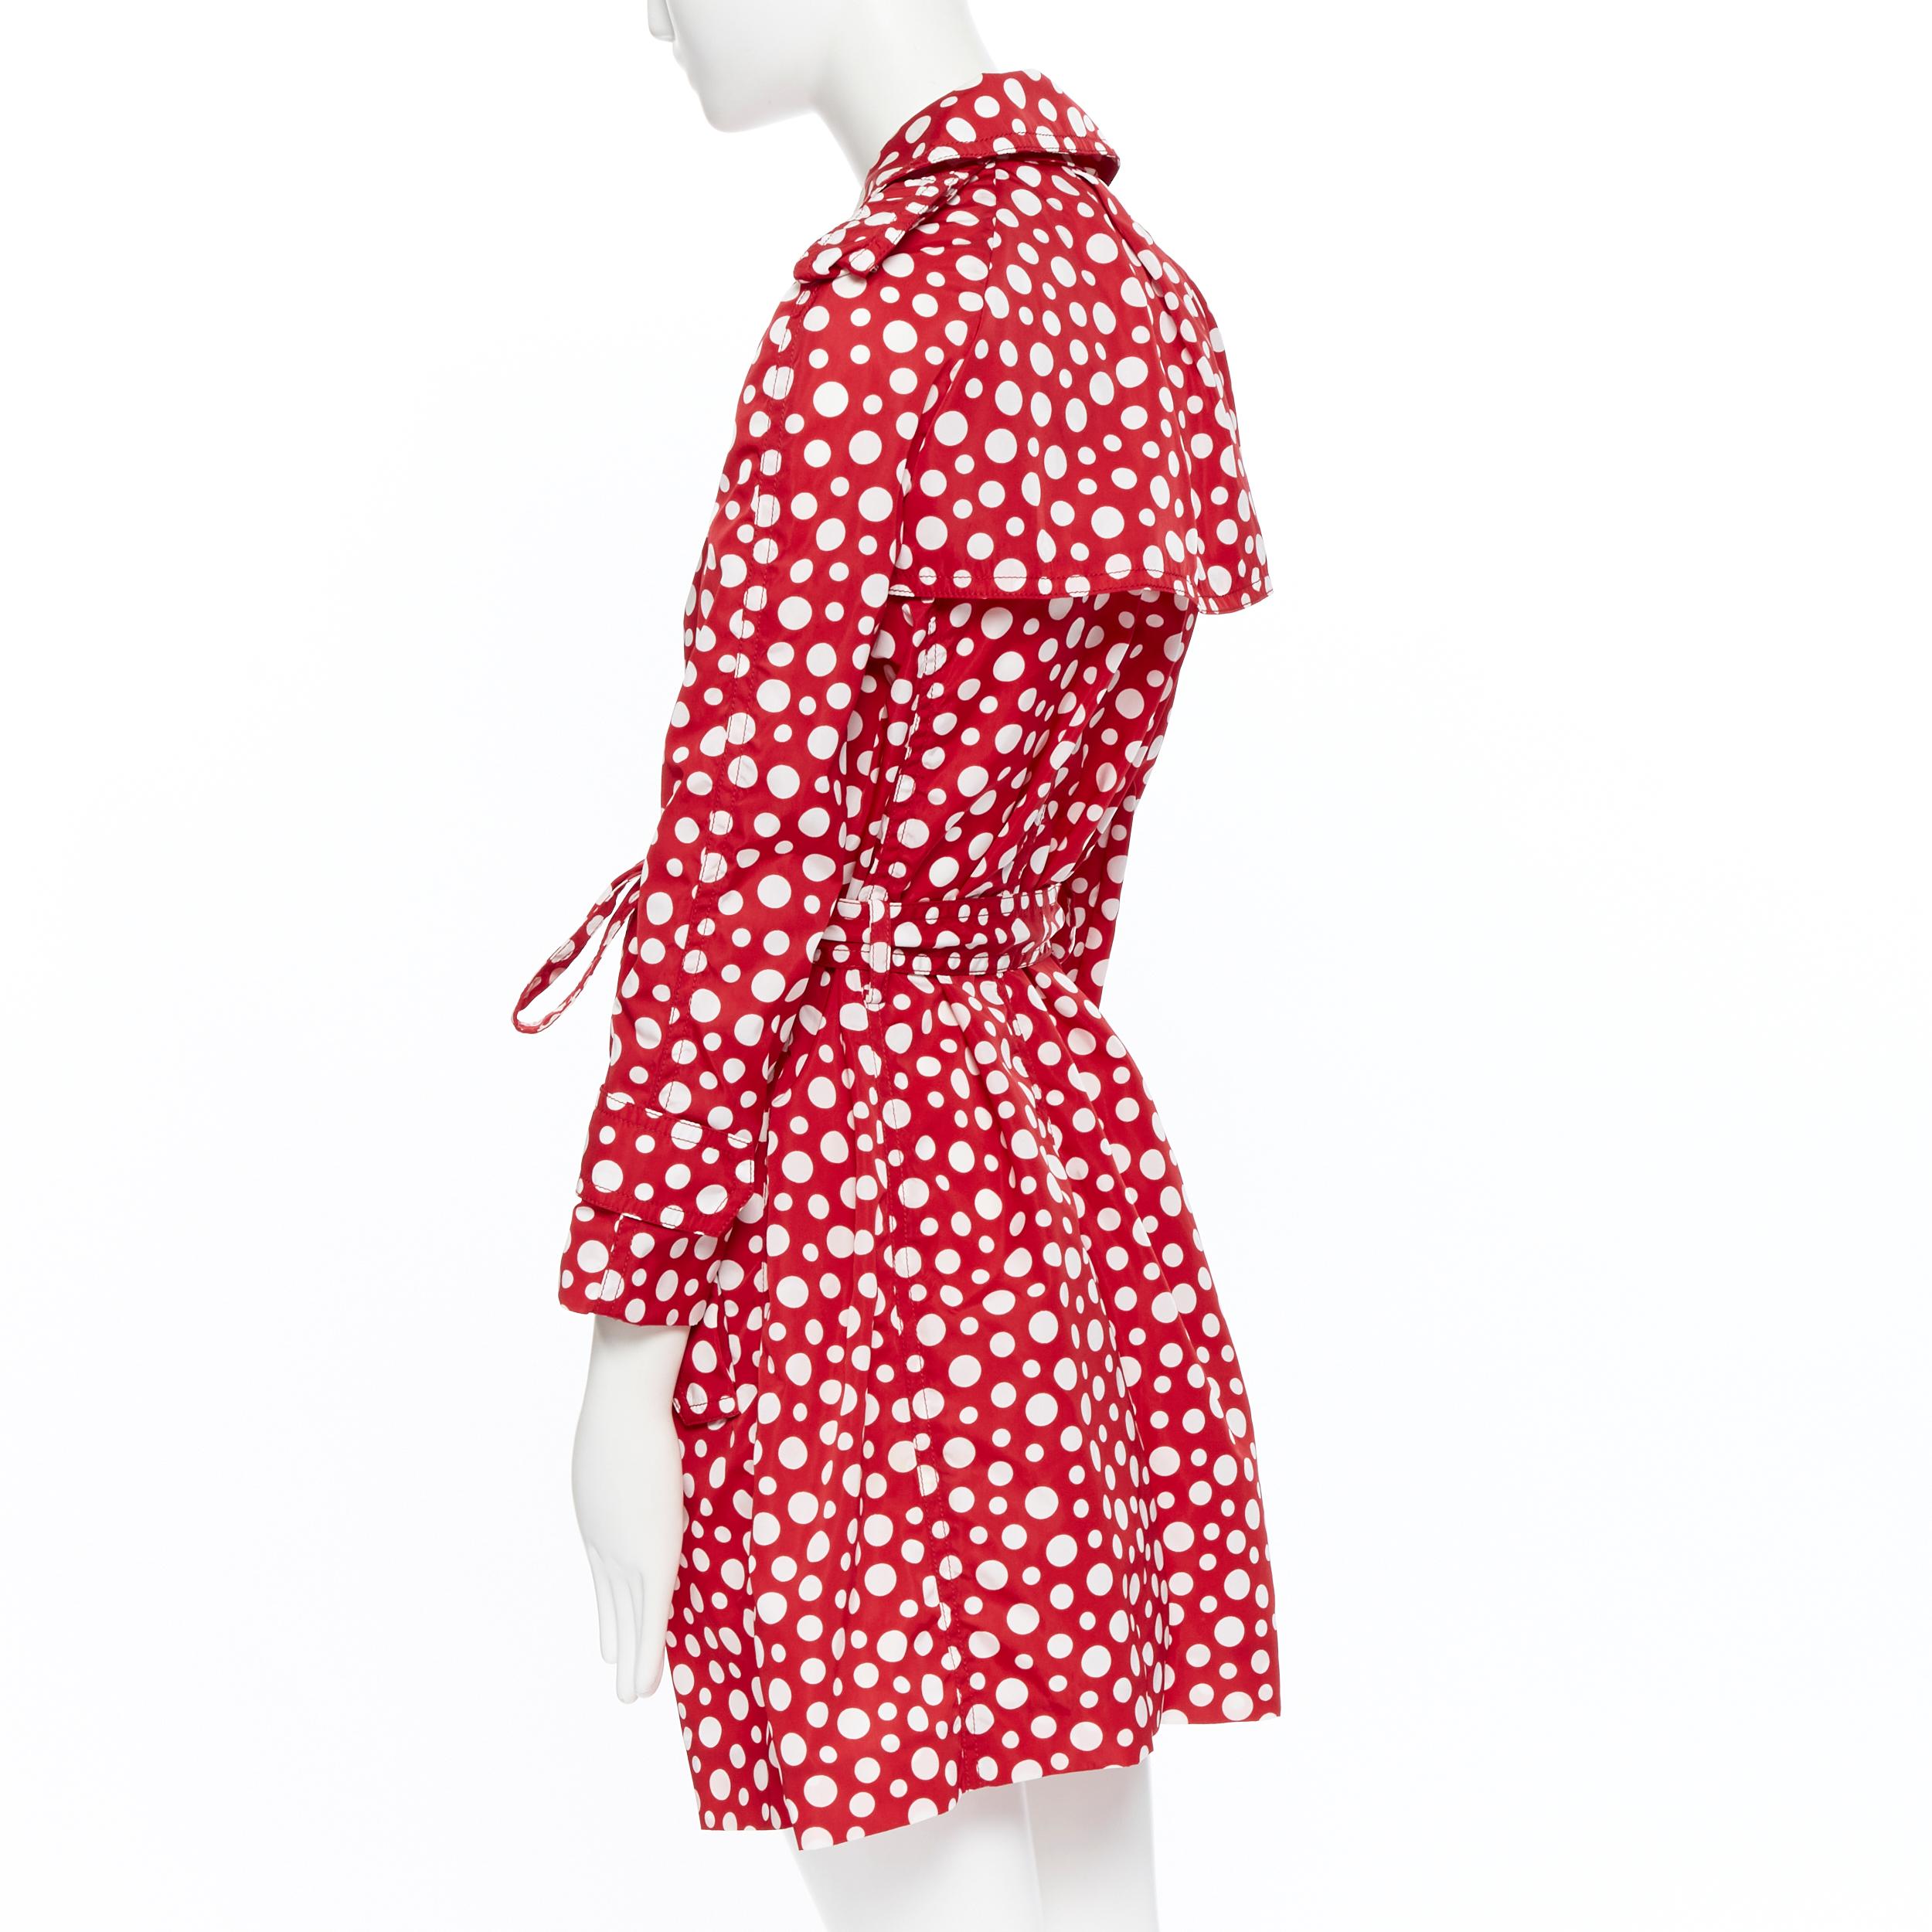 runway LOUIS VUITTON YAYOI KUSAMA red white spot print belted trench coat FR36 S 1